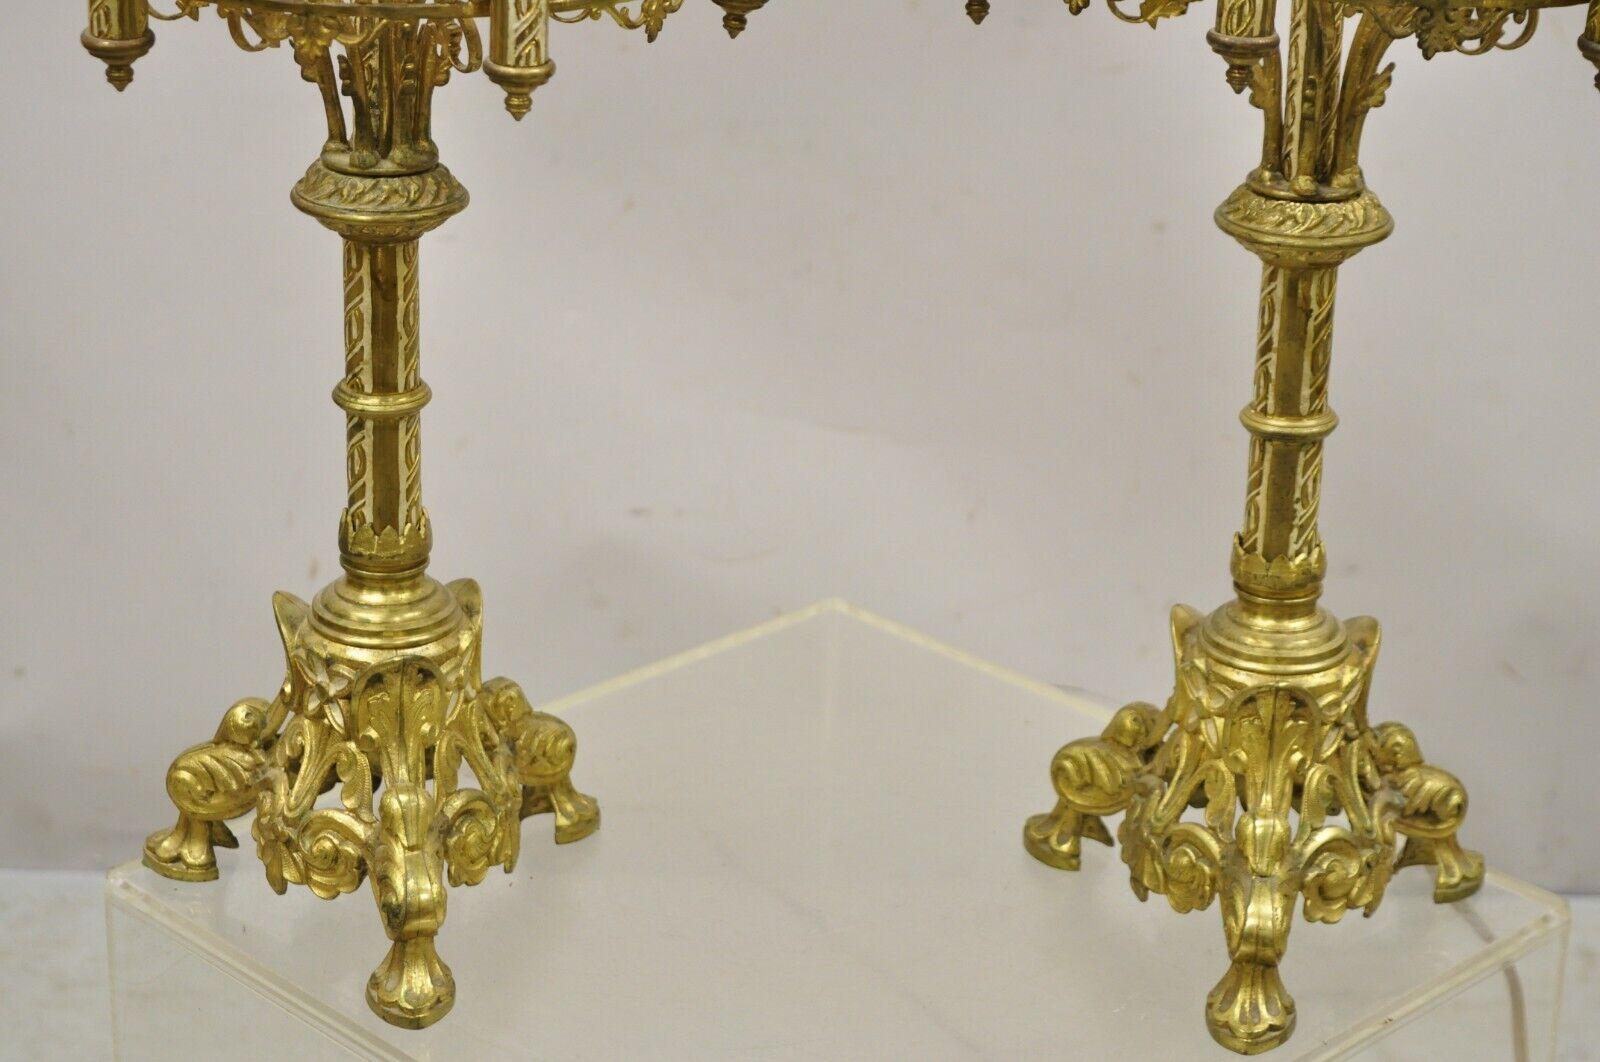 Antique Gothic Revival Gold Bronze Figural Candelabra Table Lamps, a Pair For Sale 6